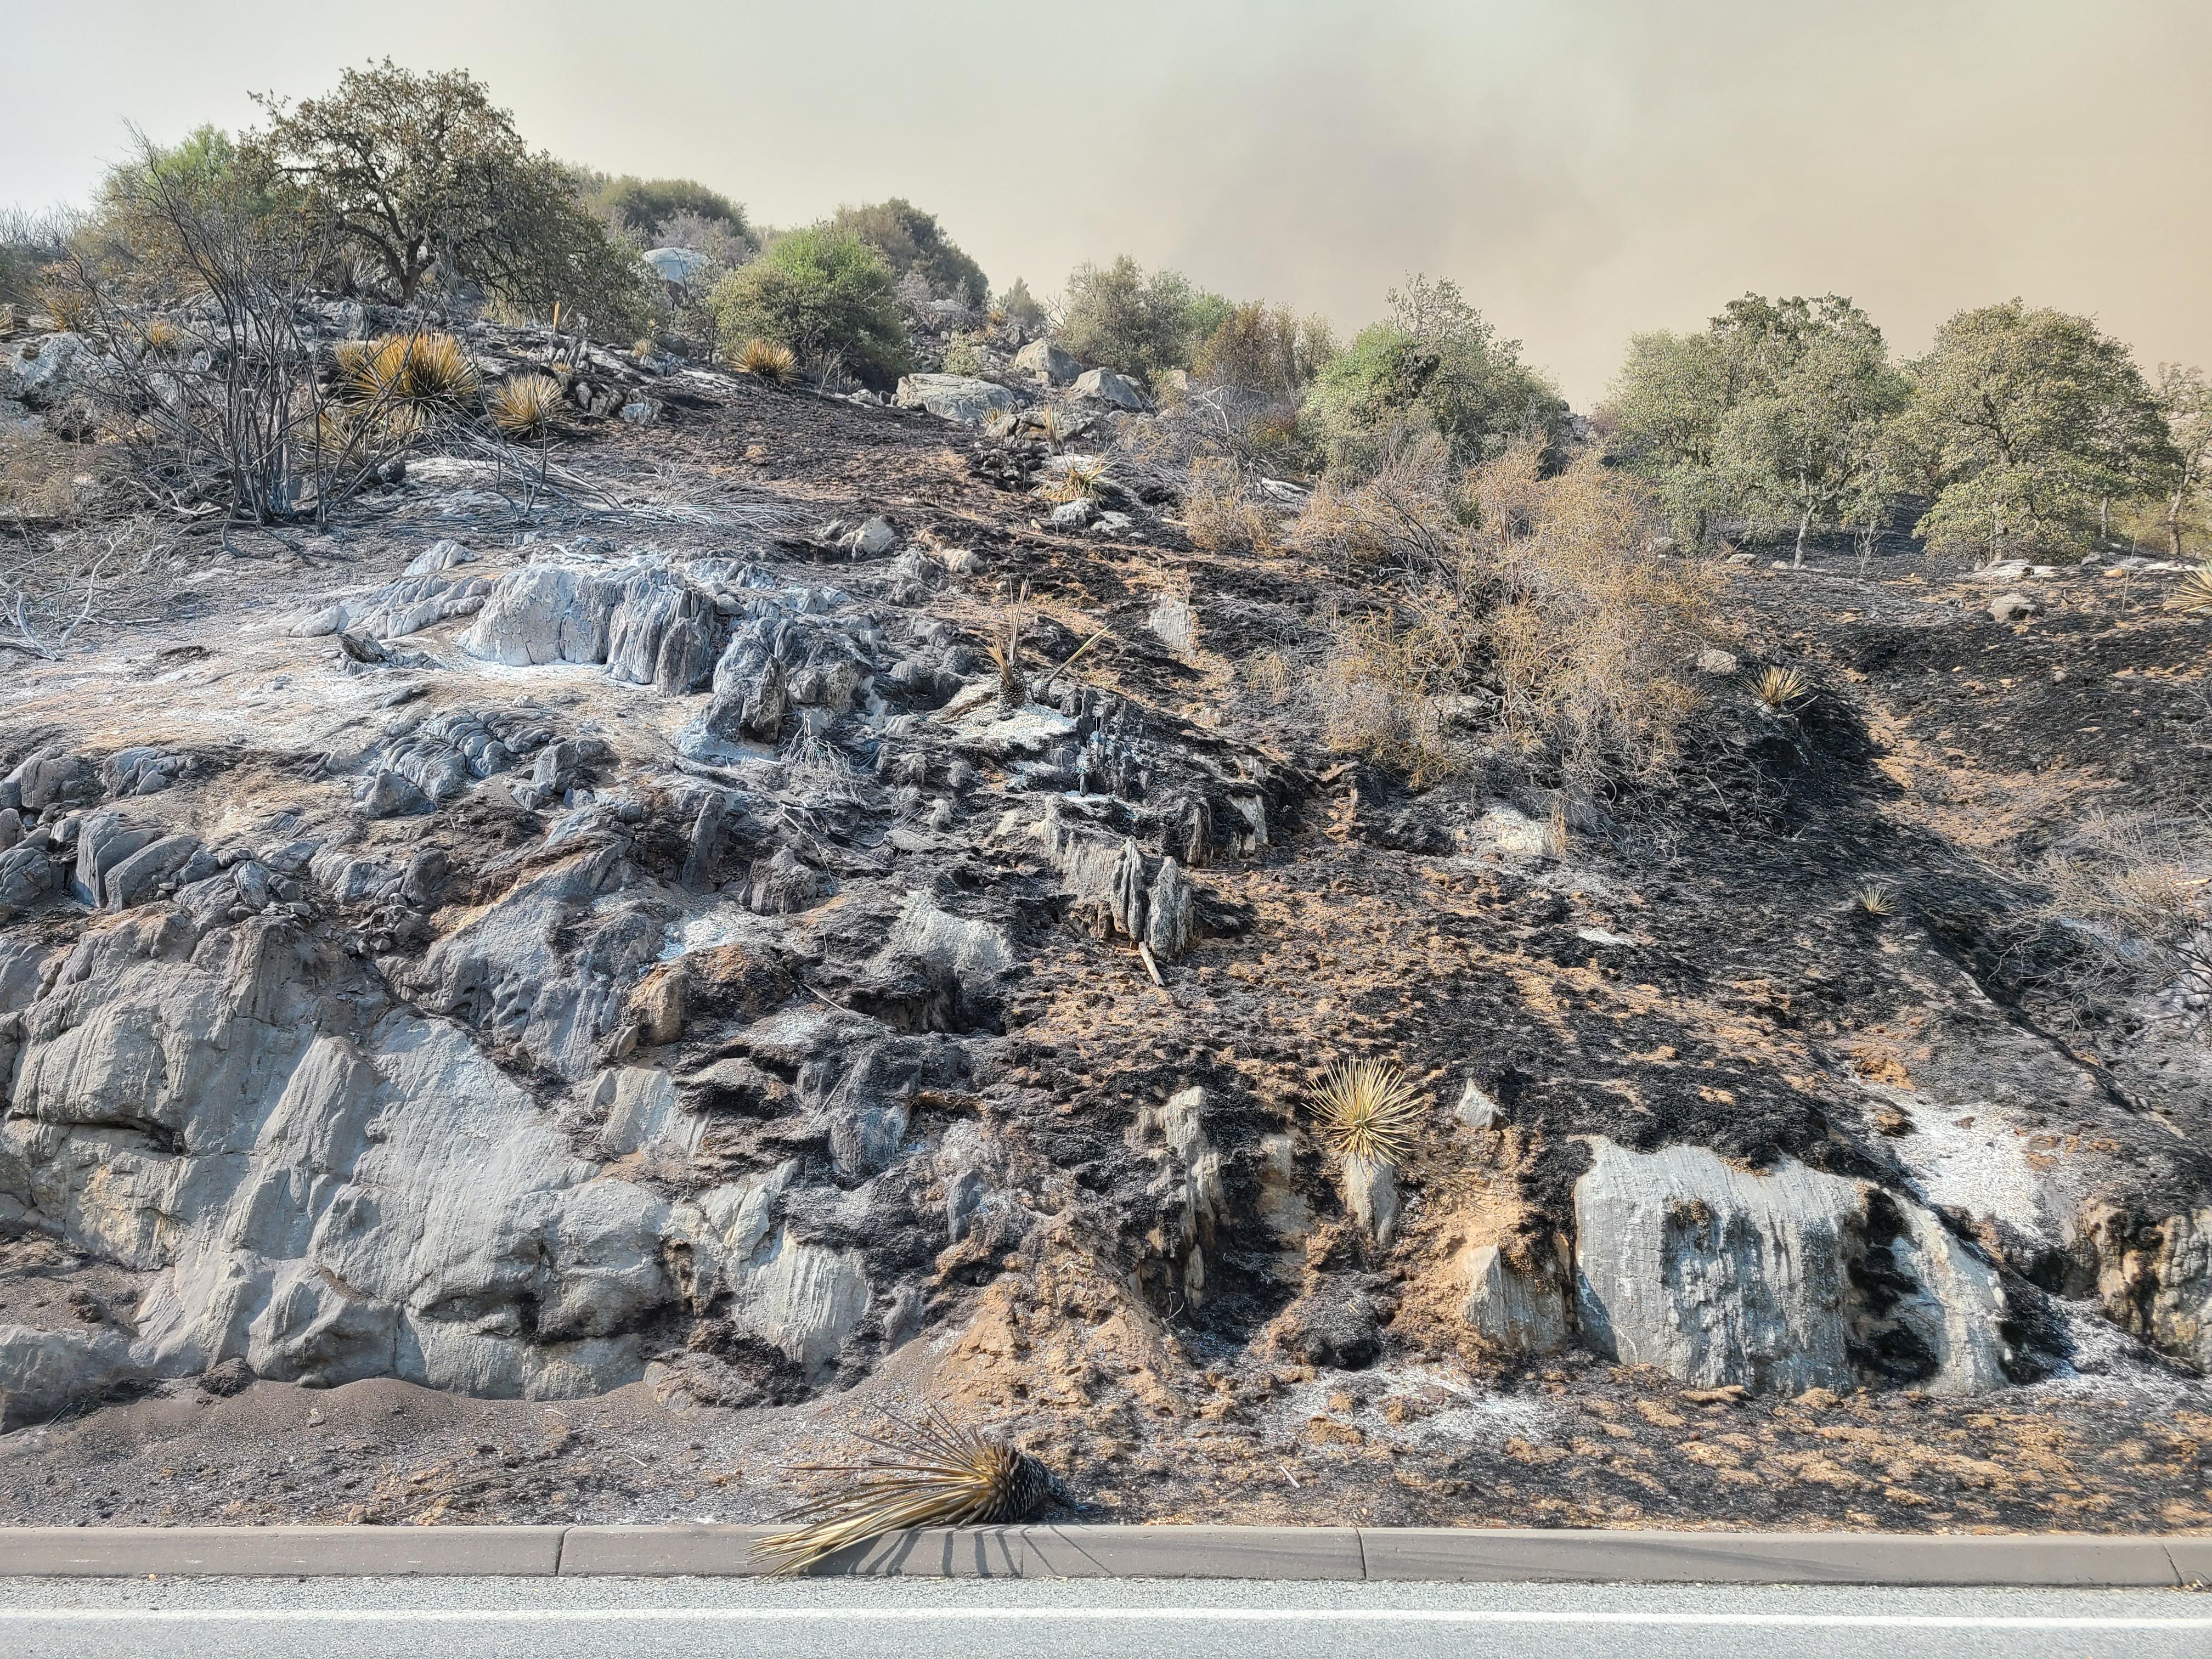 A scorched hillside with a burned yucca plant lying at the bottom